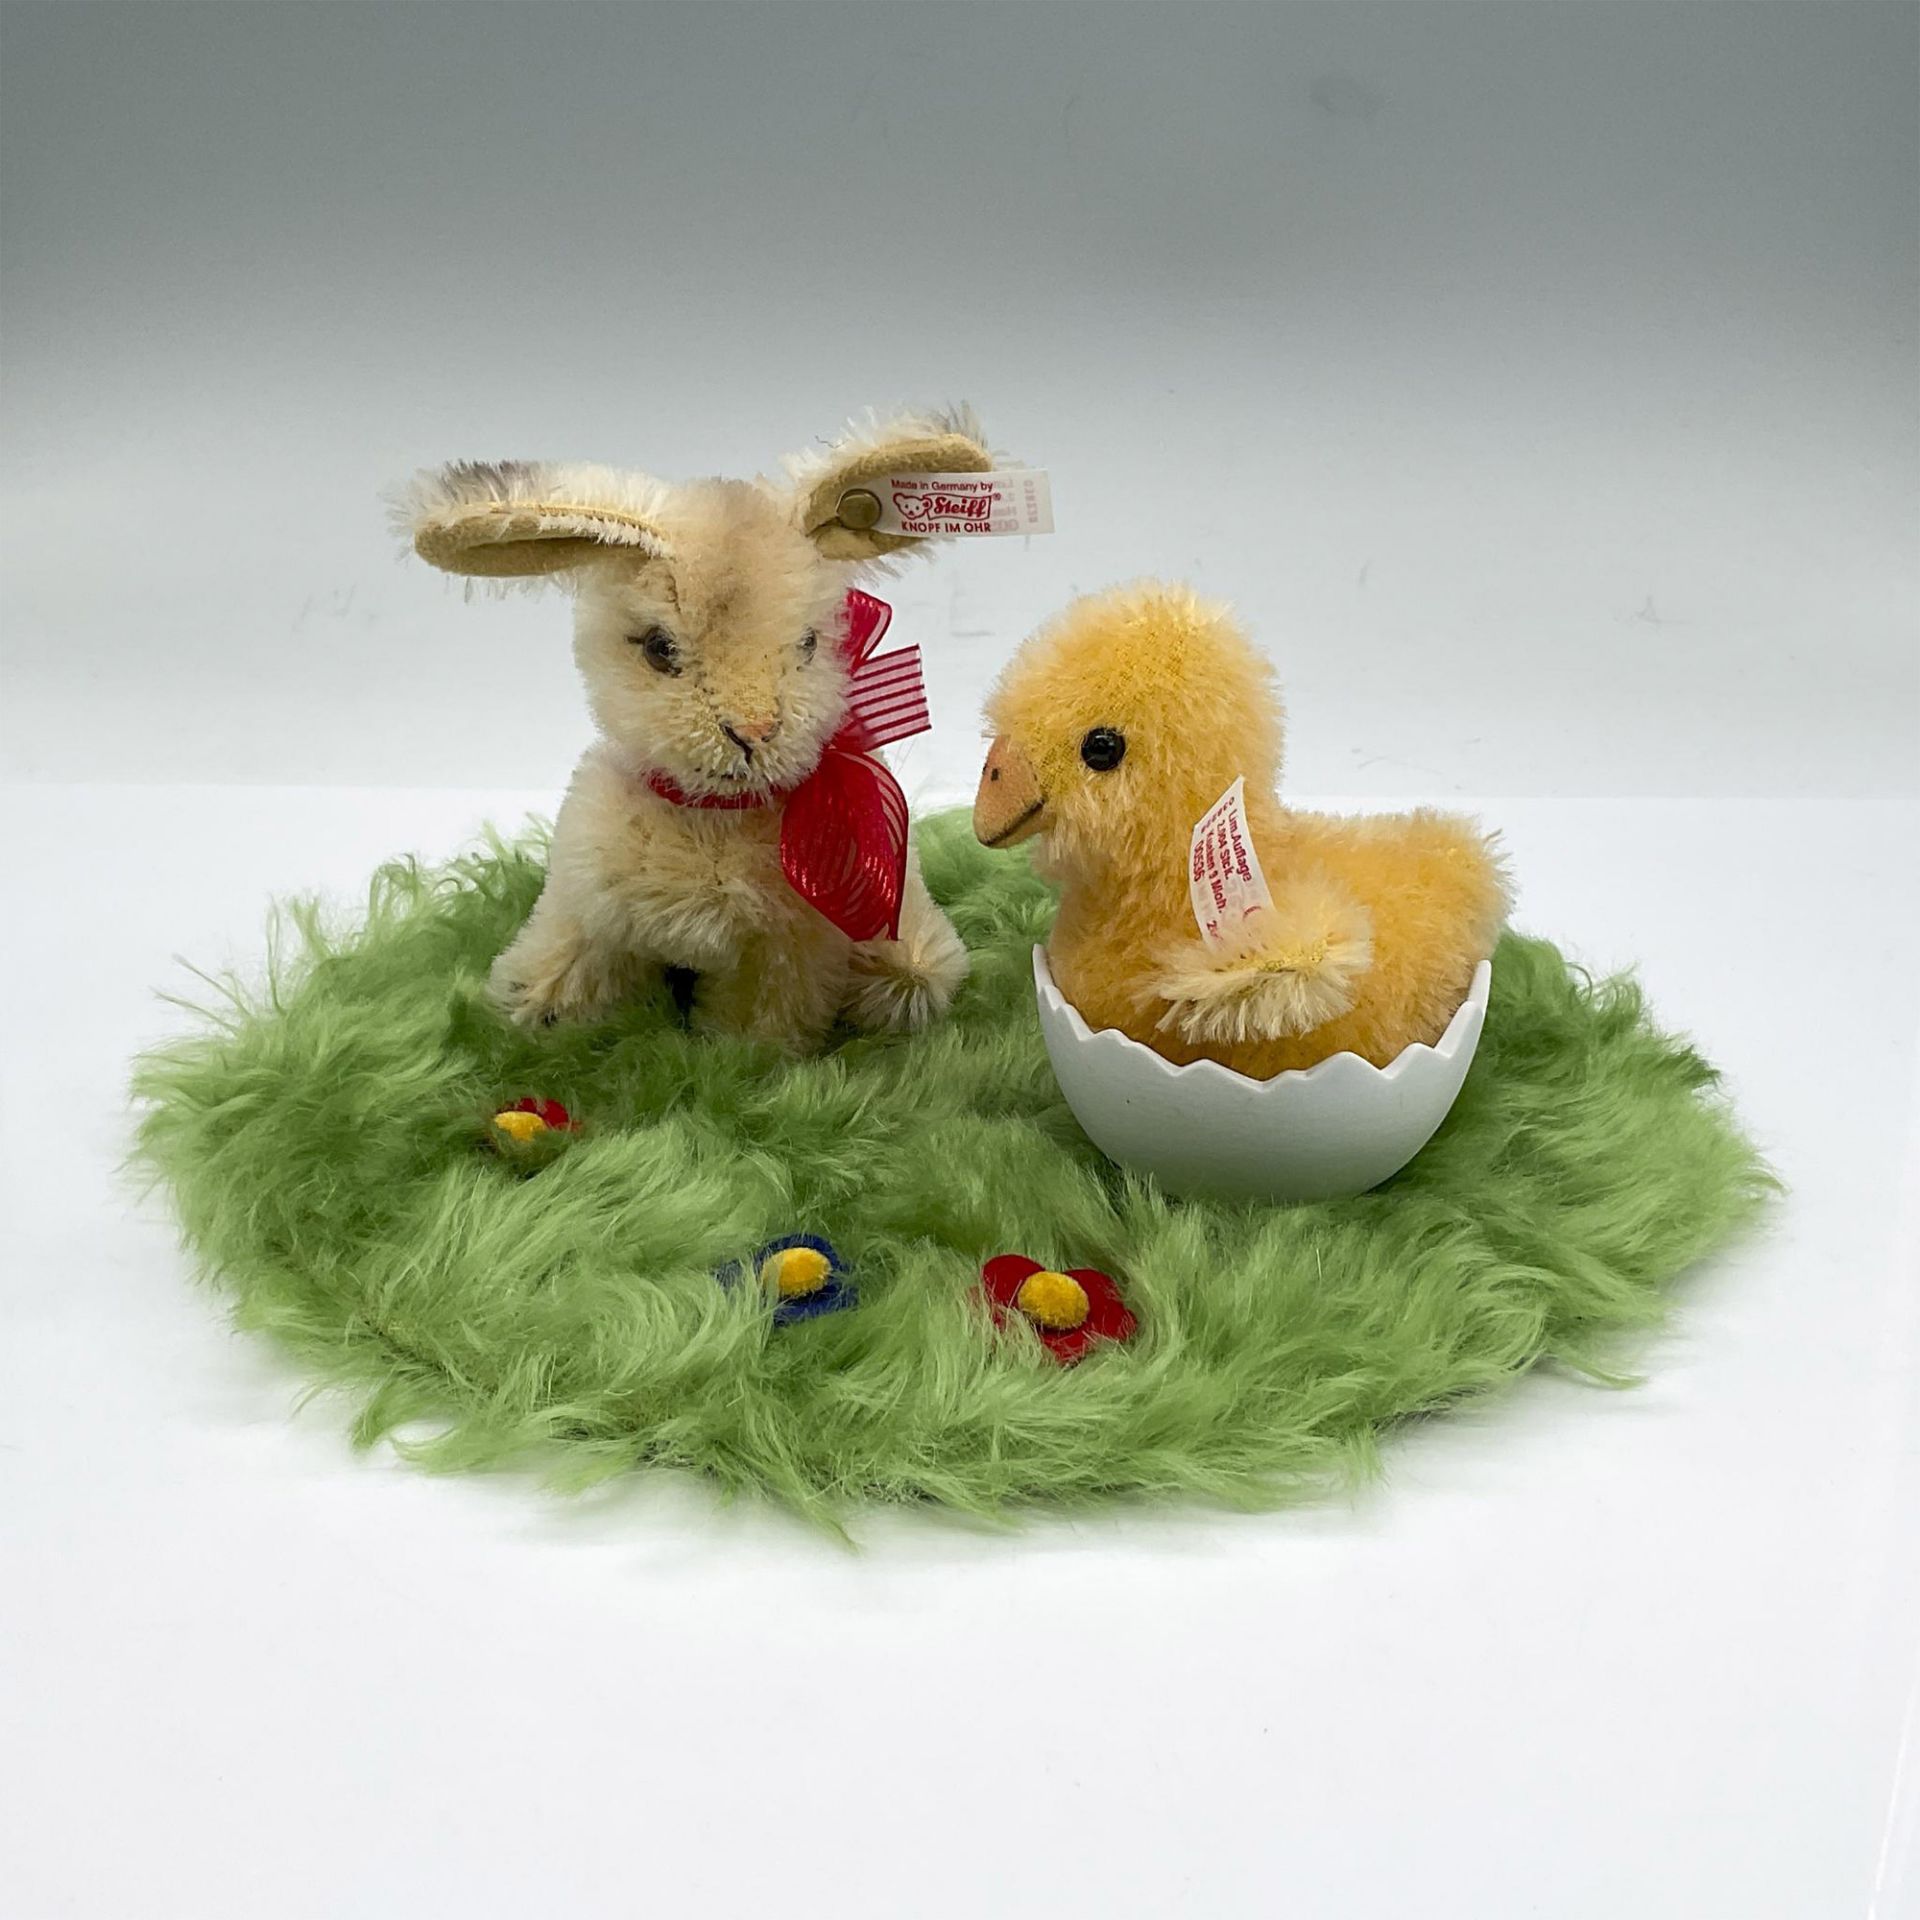 Steiff Mohair Figures, Easter Diorama of Bunny and Chick